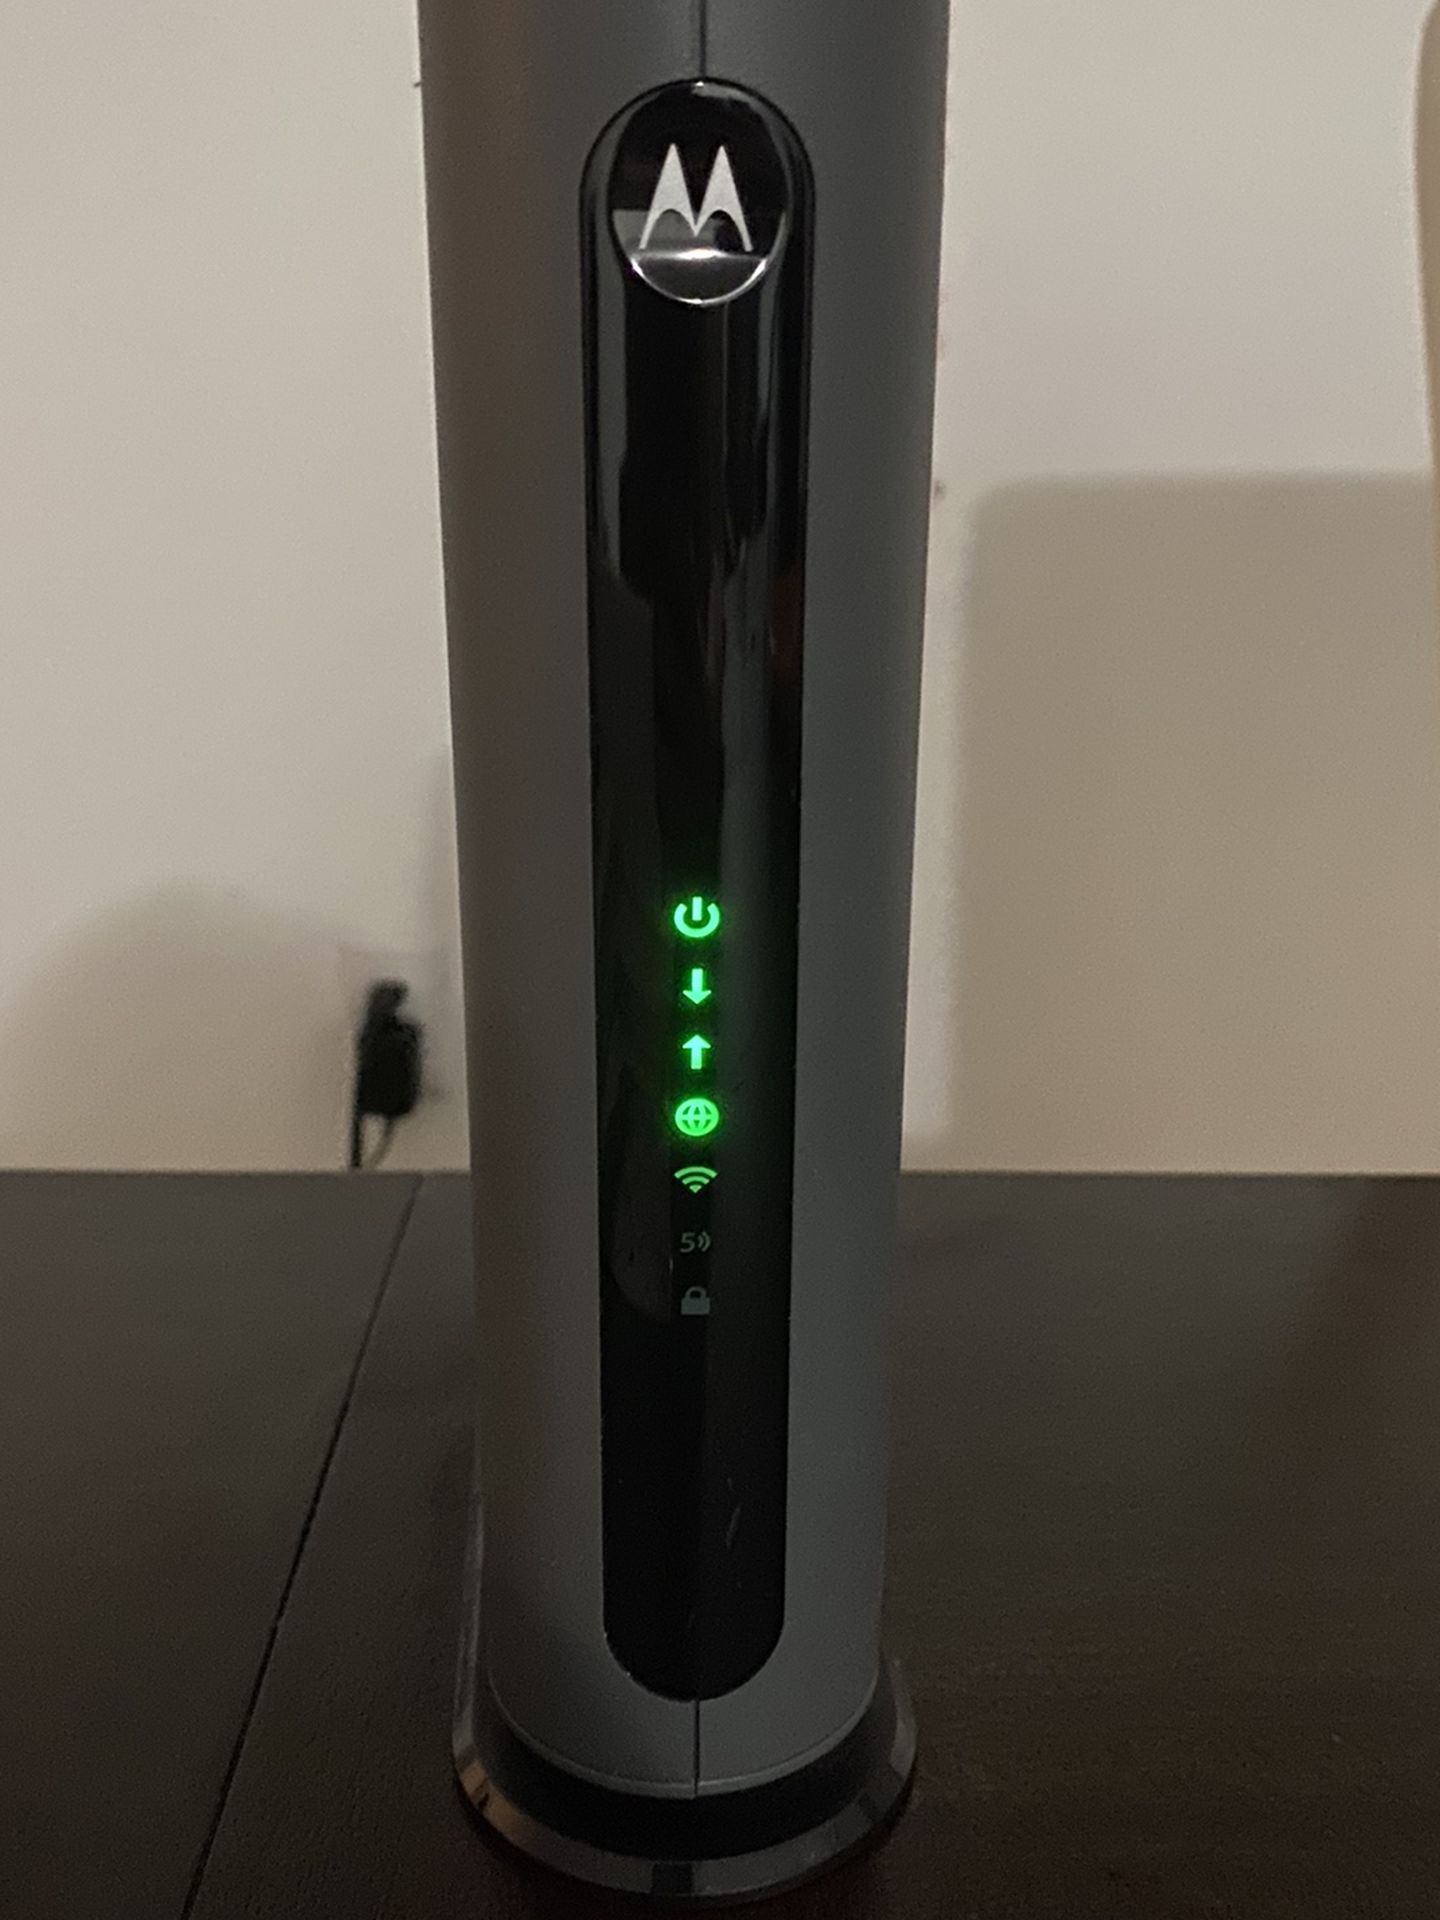 Motorola - Dual-Band AC1900 Router with 16 x 4 DOCSIS 3.0 Cable Modem - Black